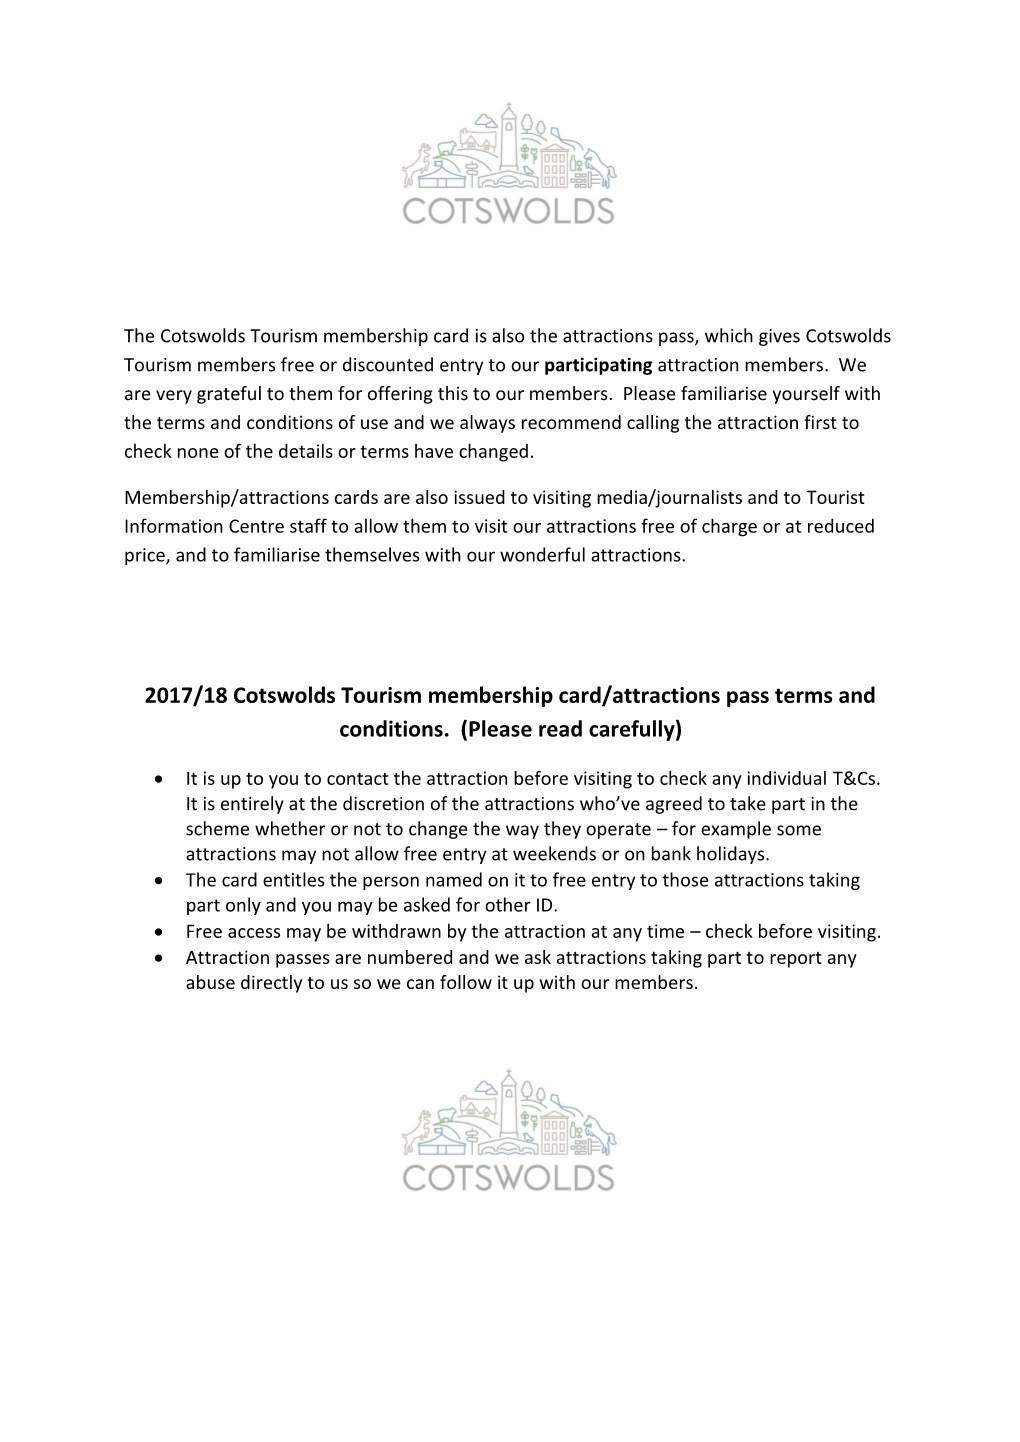 2017/18 Cotswolds Tourism Membership Card/Attractions Pass Terms and Conditions